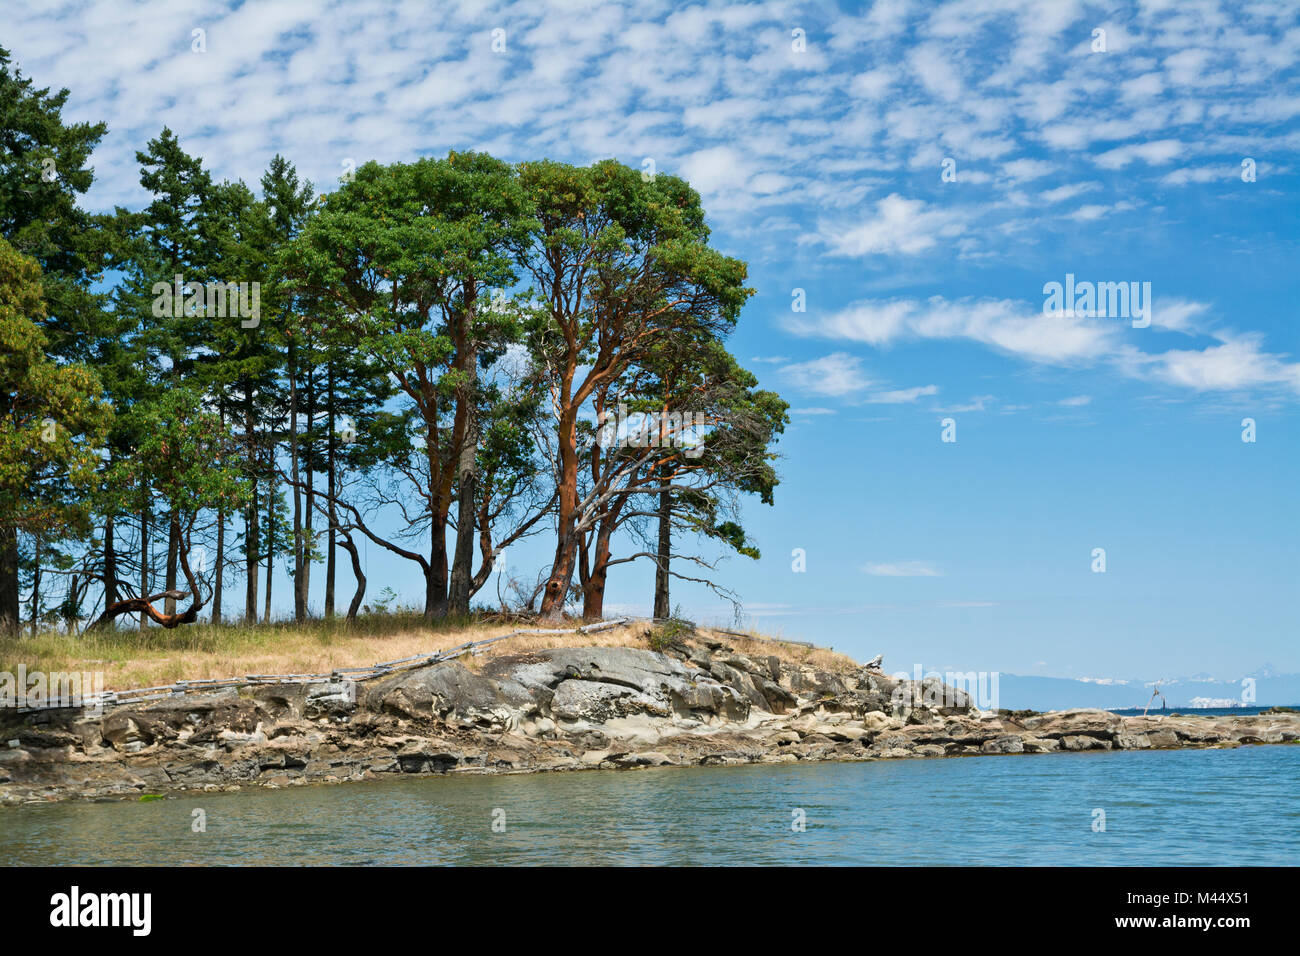 Arbutus trees at Morning Beach on Galiano Island, BC, Canada.  One of the Southern Gulf Islands of British Columbia. Stock Photo